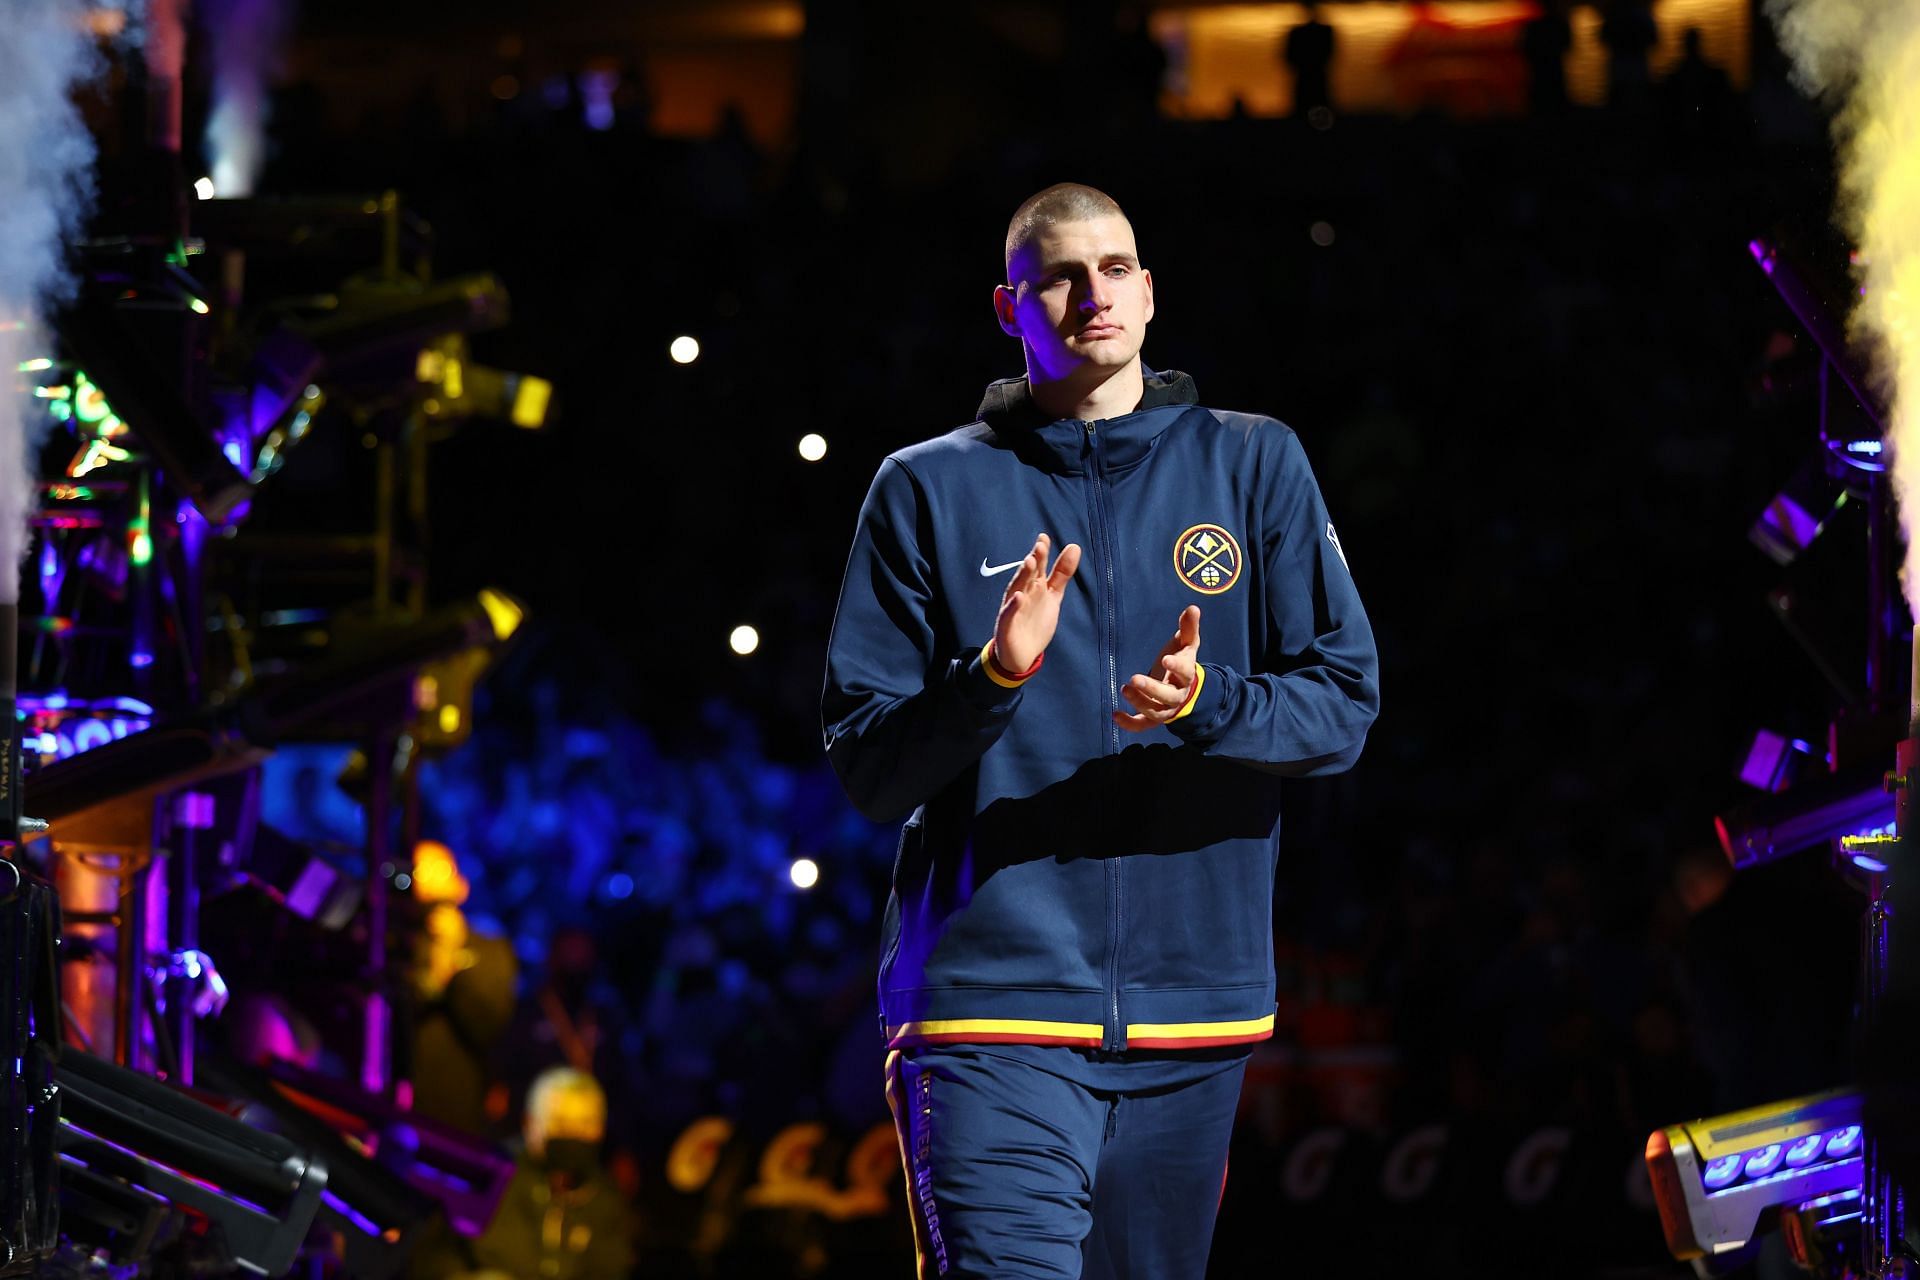 Nikola Jokic at the team introduction ahead of a Denver Nuggets game